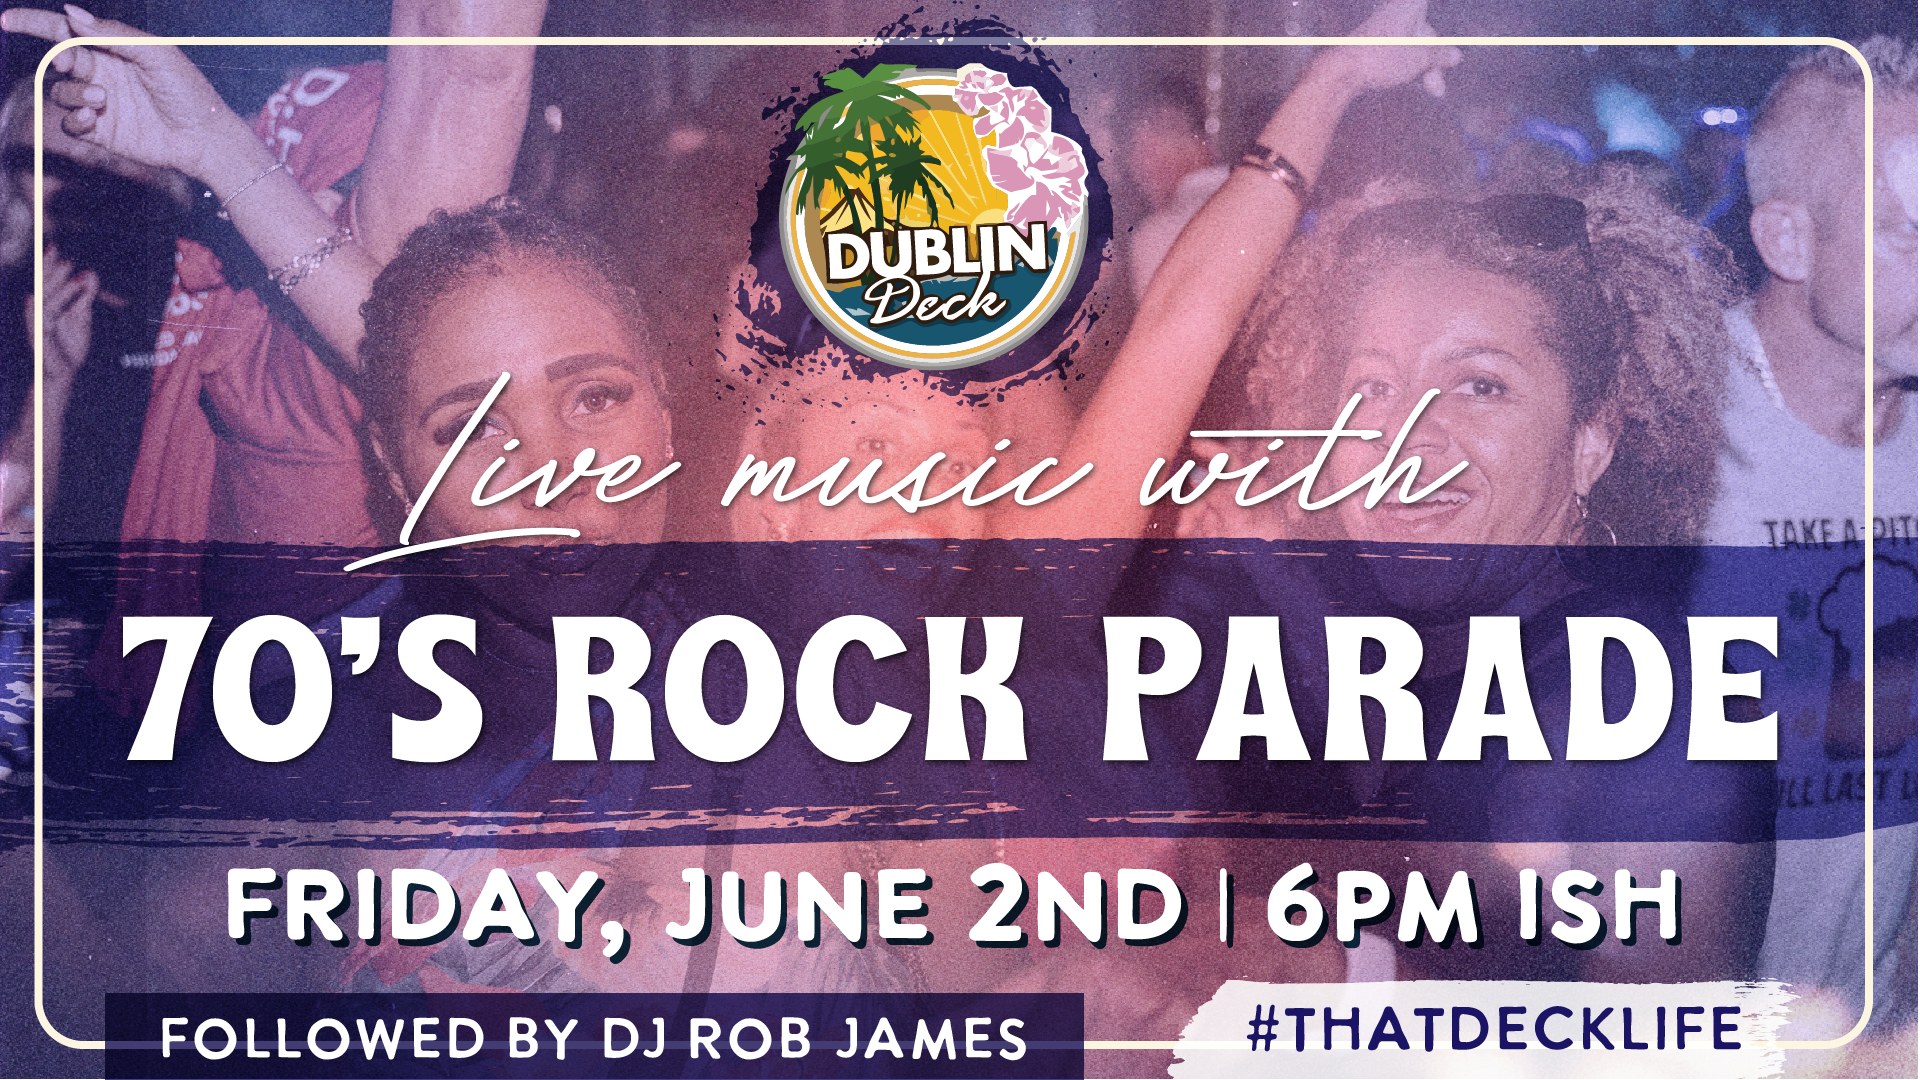 Get the weekend vibes goin' with 70's Rock Parade! Music starts at 6PM